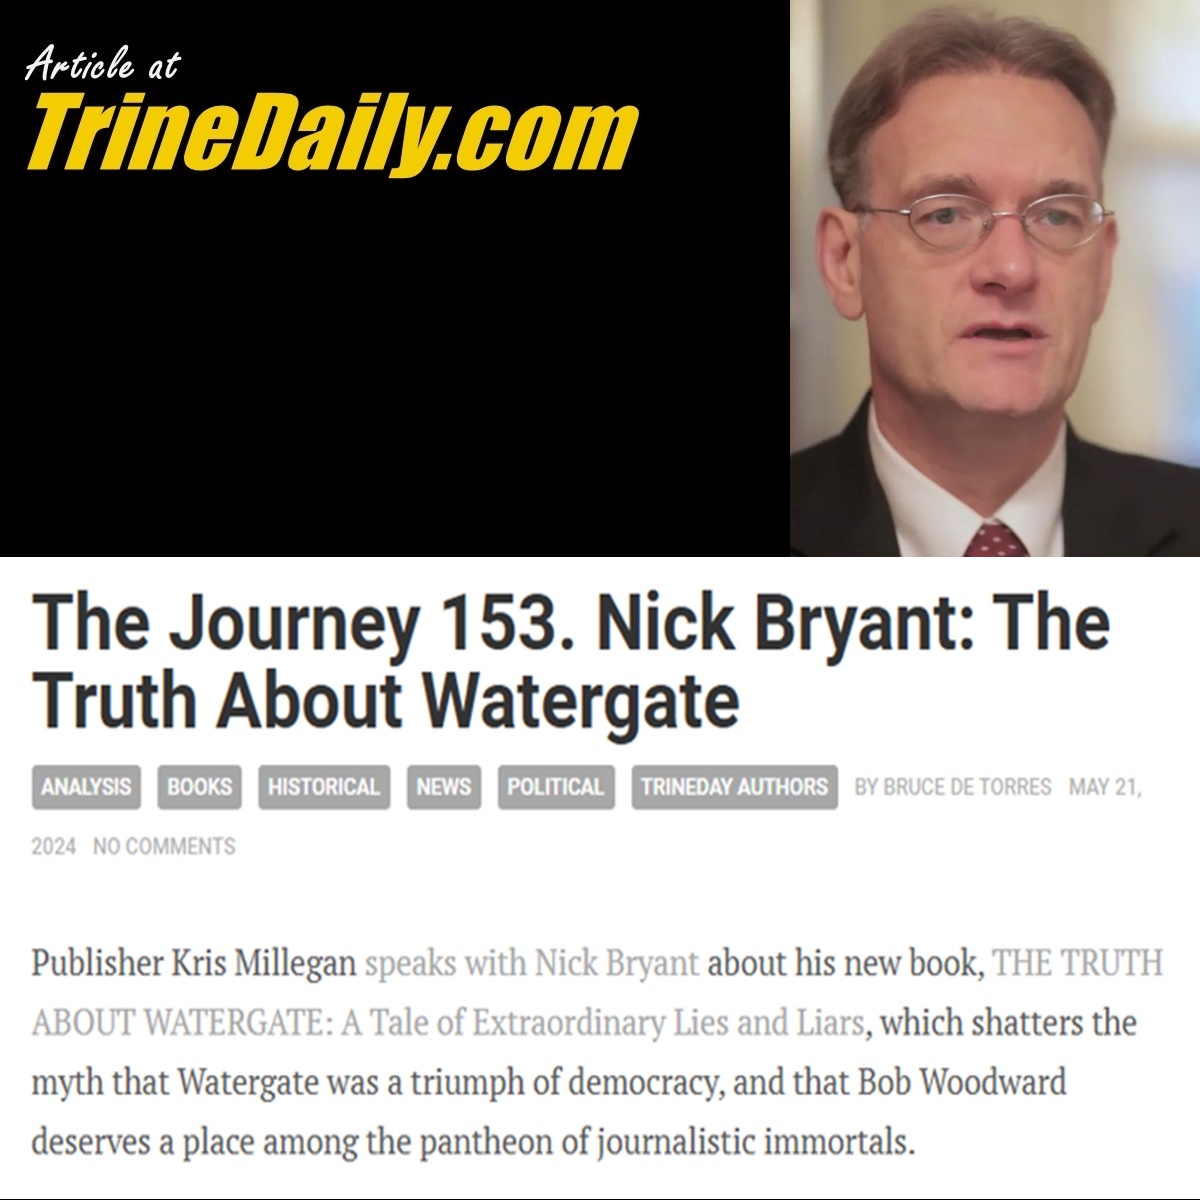 ARTICLE AT TRINEDAILY.COM
The Journey Podcast 153. Nick Bryant
The Truth About Watergate
Show link is in the comments. #TrineDay #TrineDayPress #TrineDayPublishing #KrisMillegan #NickBryant #TheTruthAboutWatergate #RichardNixon #RichardMNixon #BobWoodward #CarlBernstein